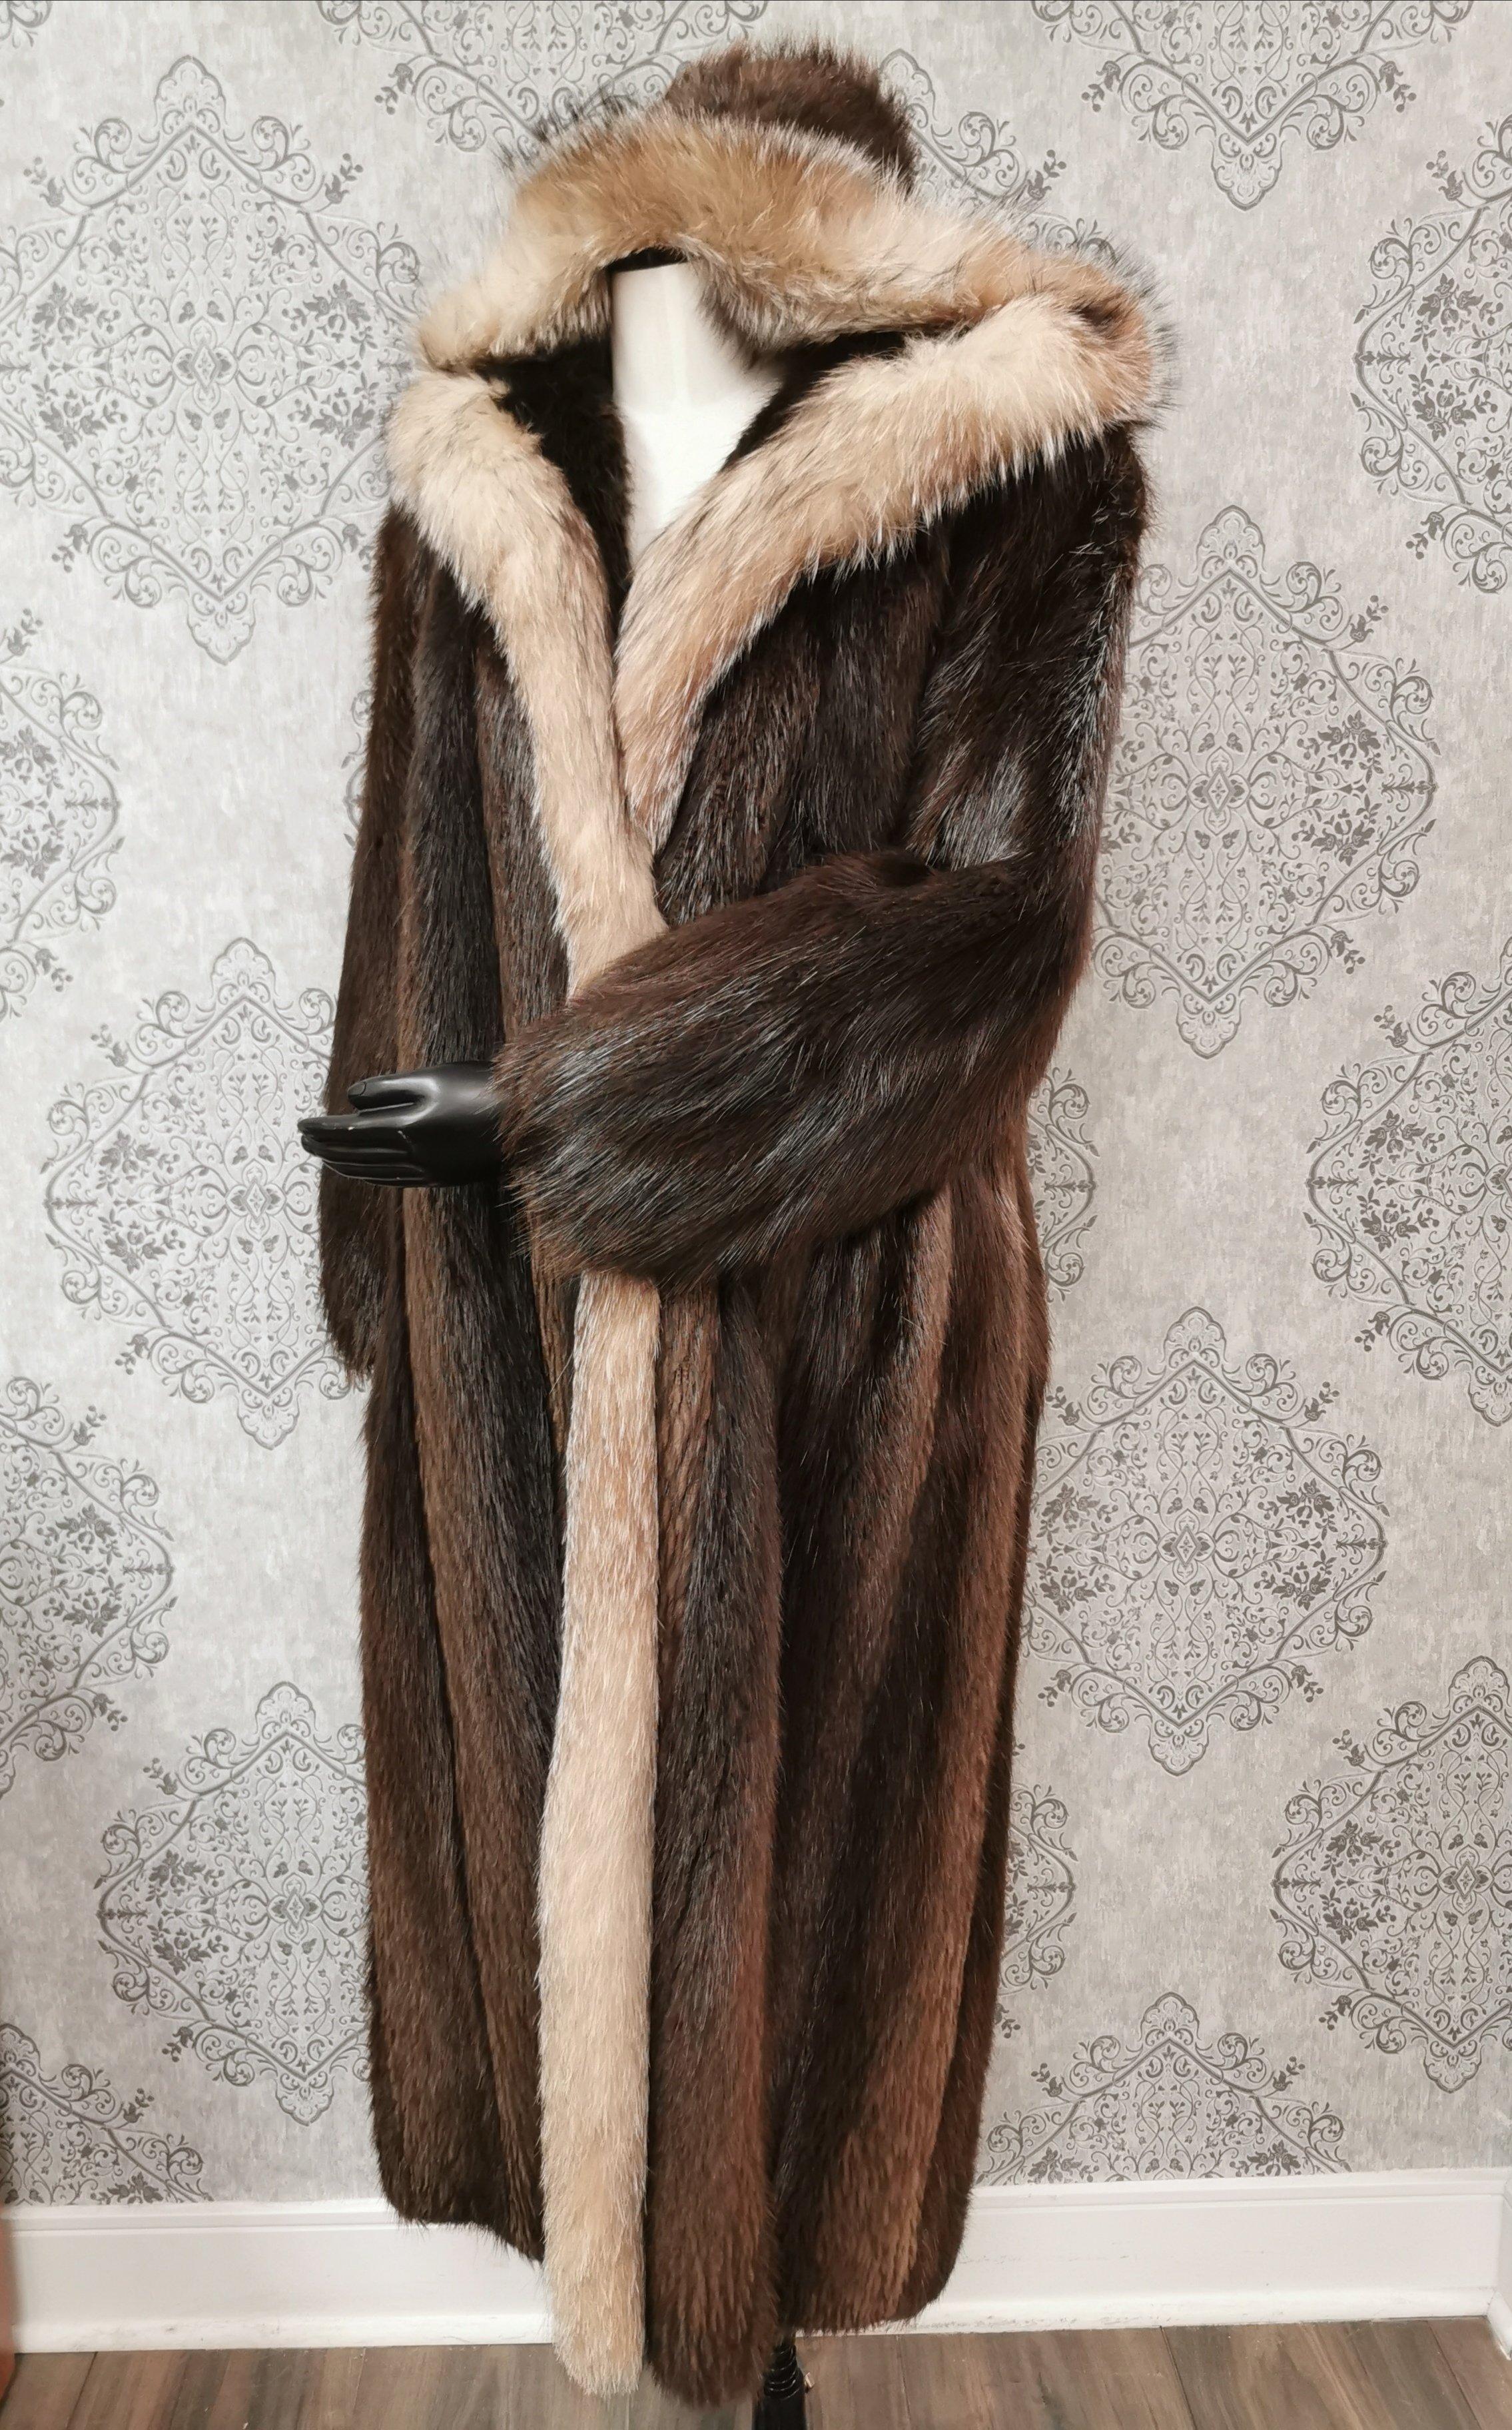 PRODUCT DESCRIPTION:

stunning Vincenzo collection Beaver fur full length coat with crystal fox fur at the front and around the hood

Condition: Like new

Closure: Hooks & Eyes

Color: Brown

Material: Beaver fur and Crystal Fox fur

Garment type: